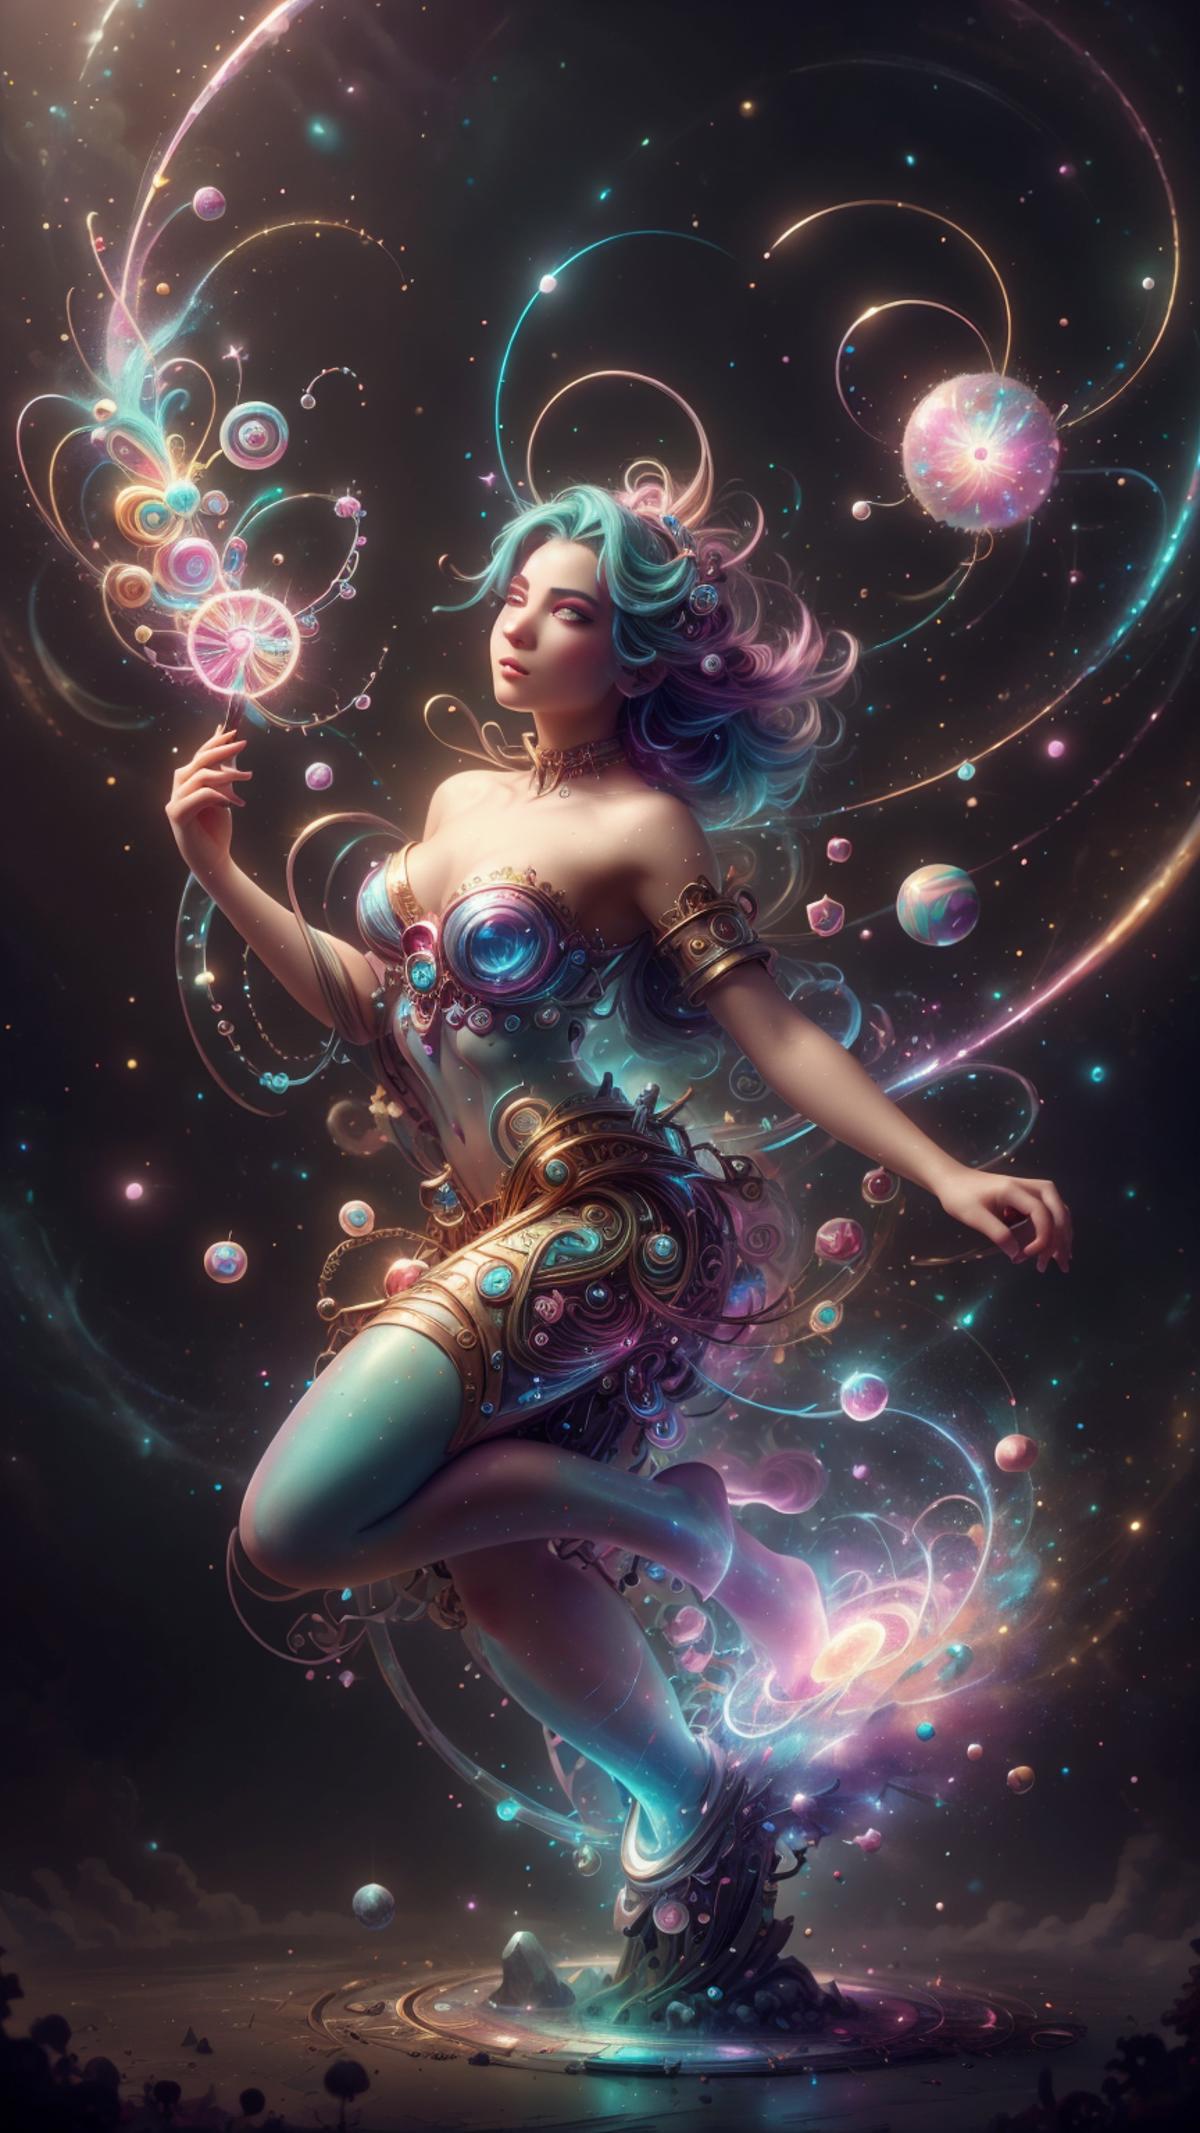 Candy magic - Grimoire image by Sofachrieger